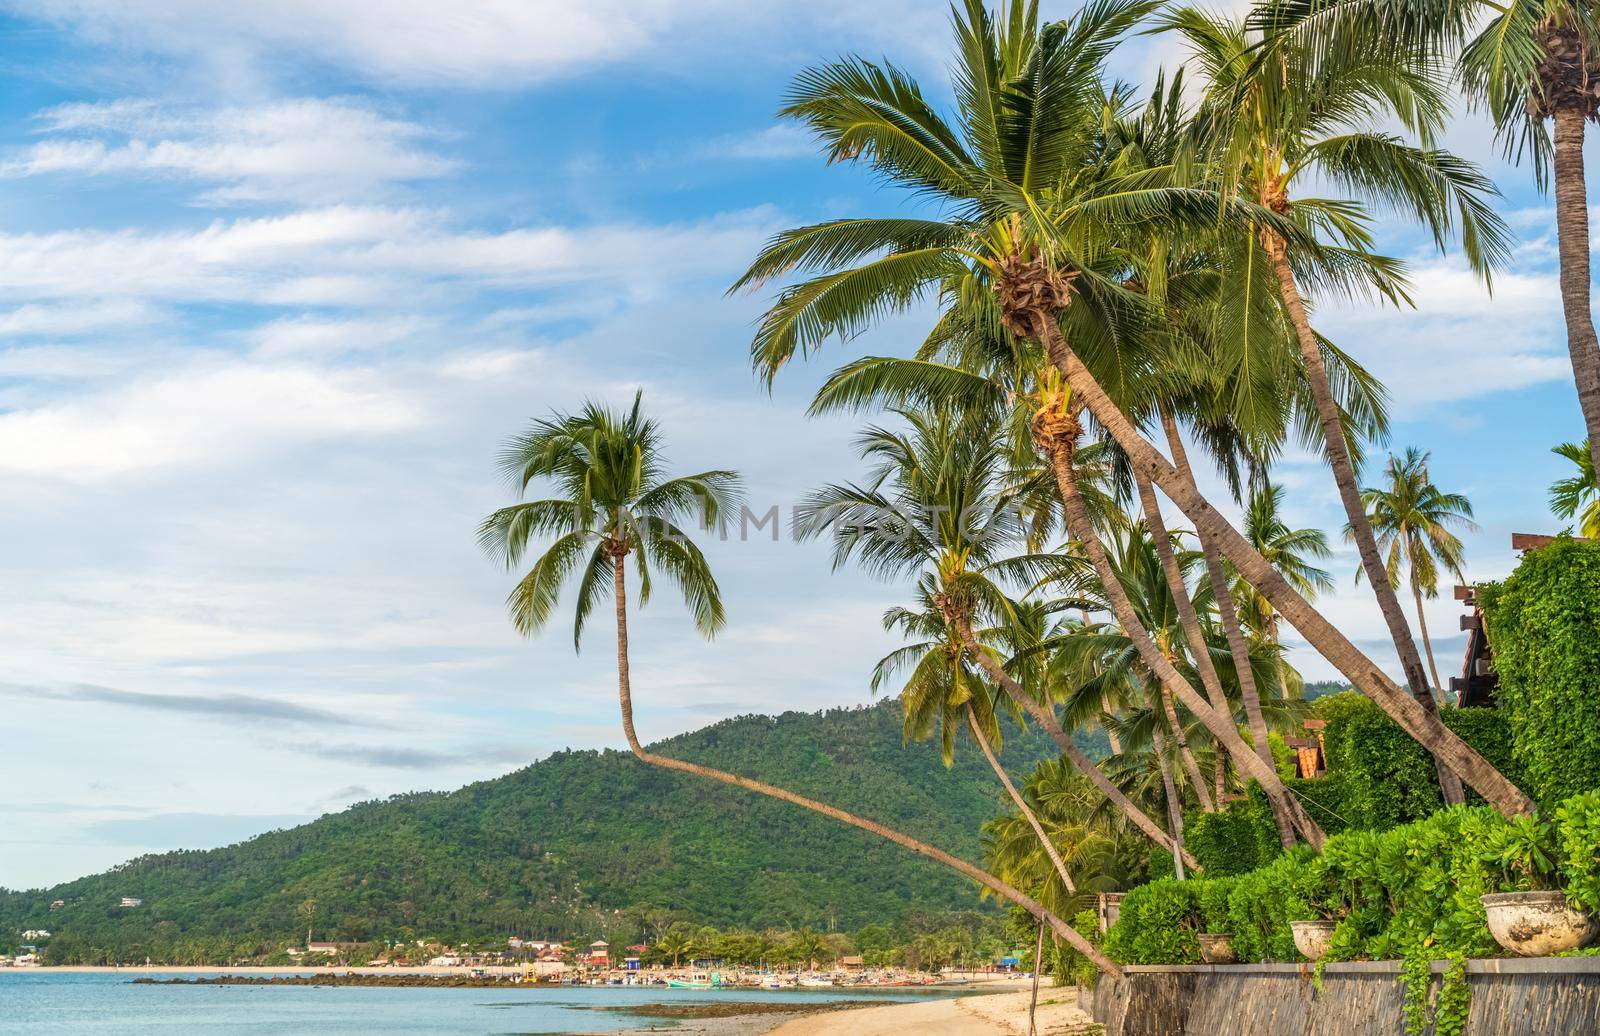 Tropical beach with coconut trees. Koh Samui, Thailand by toa55